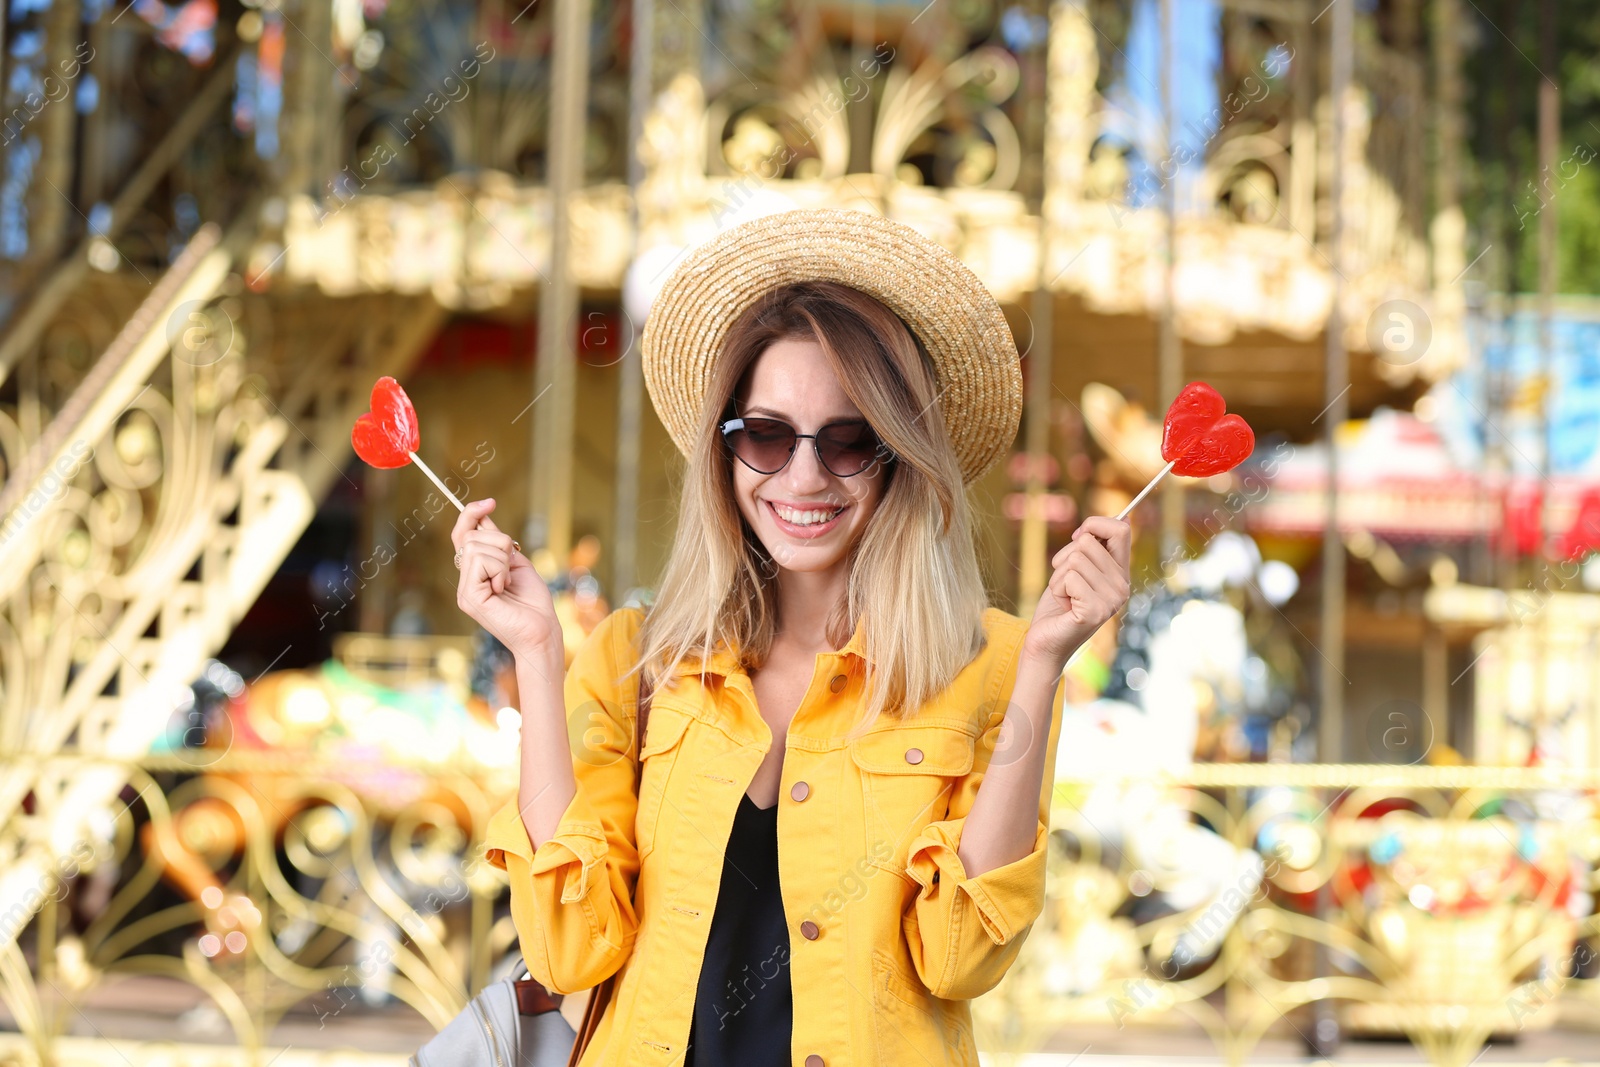 Photo of Beautiful woman with candies having fun at amusement park